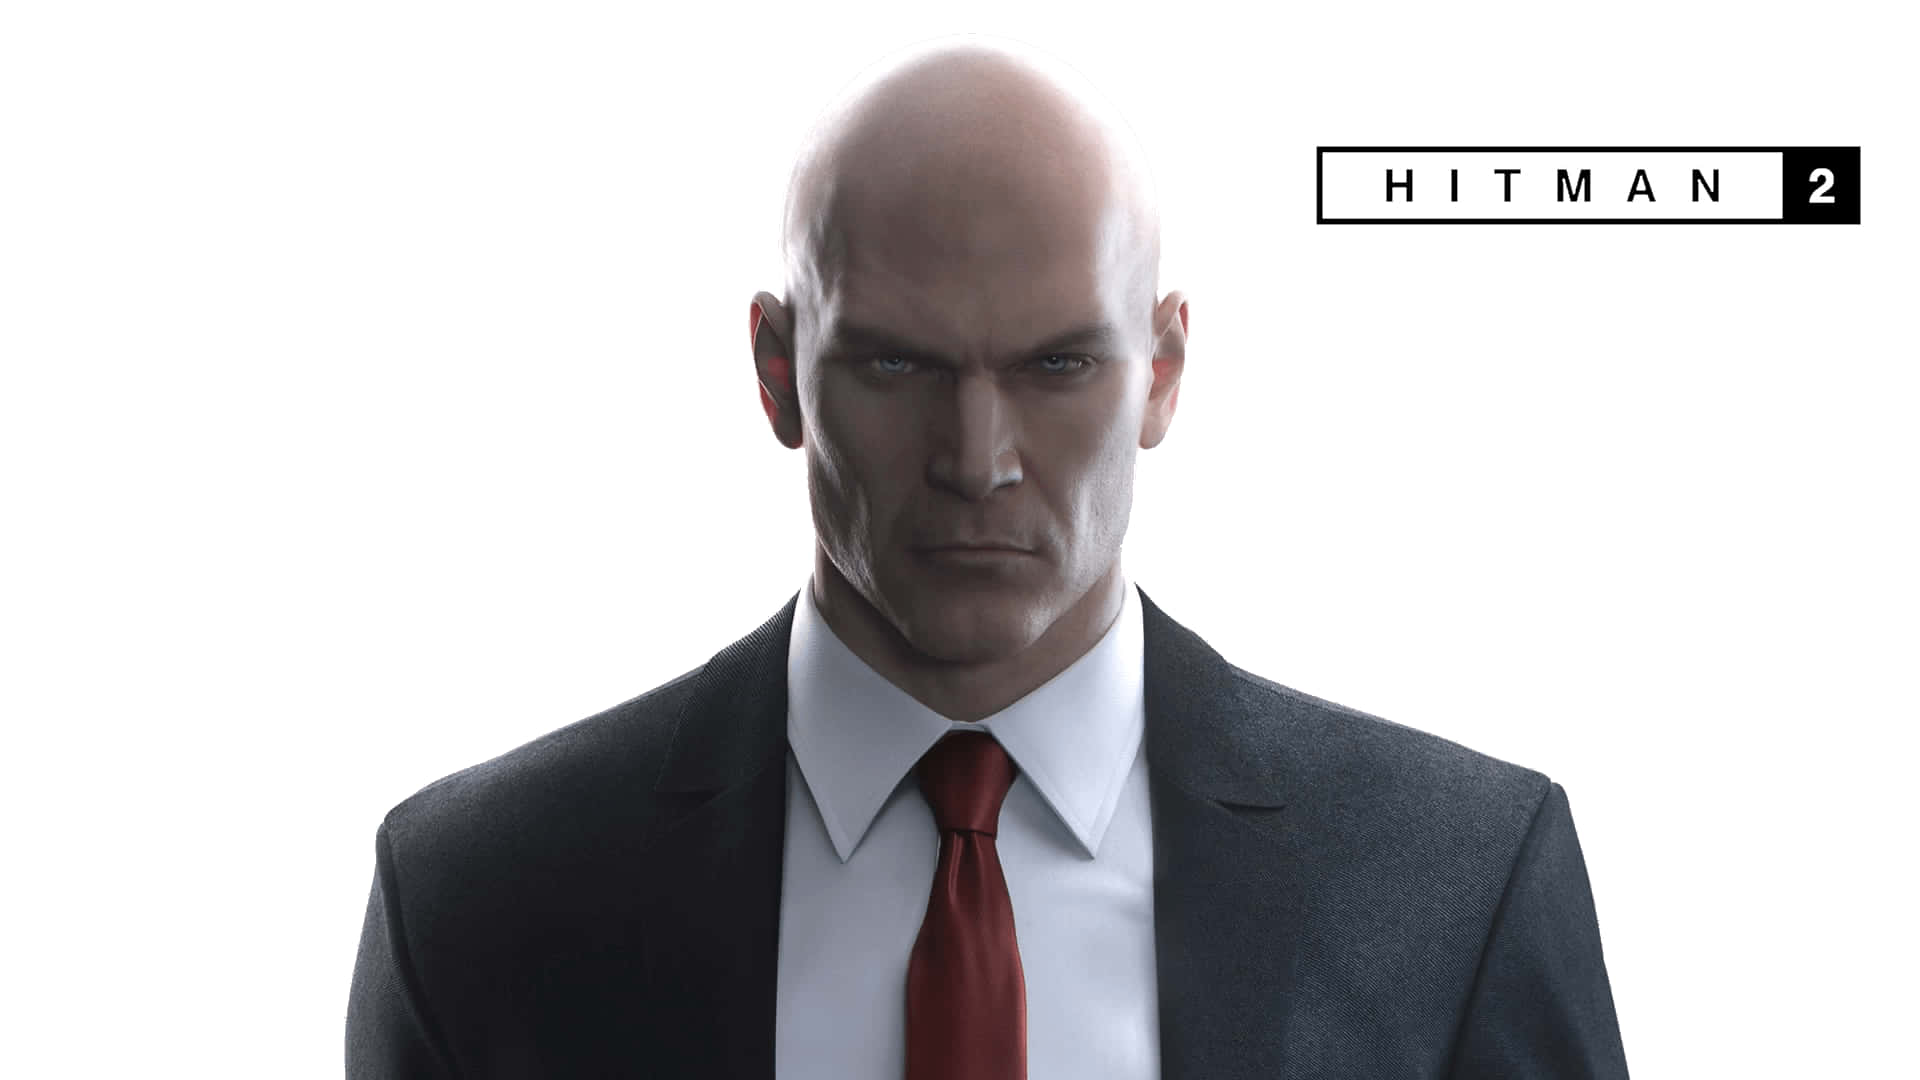 Dive into assassination with the Hitman 2 Video Game